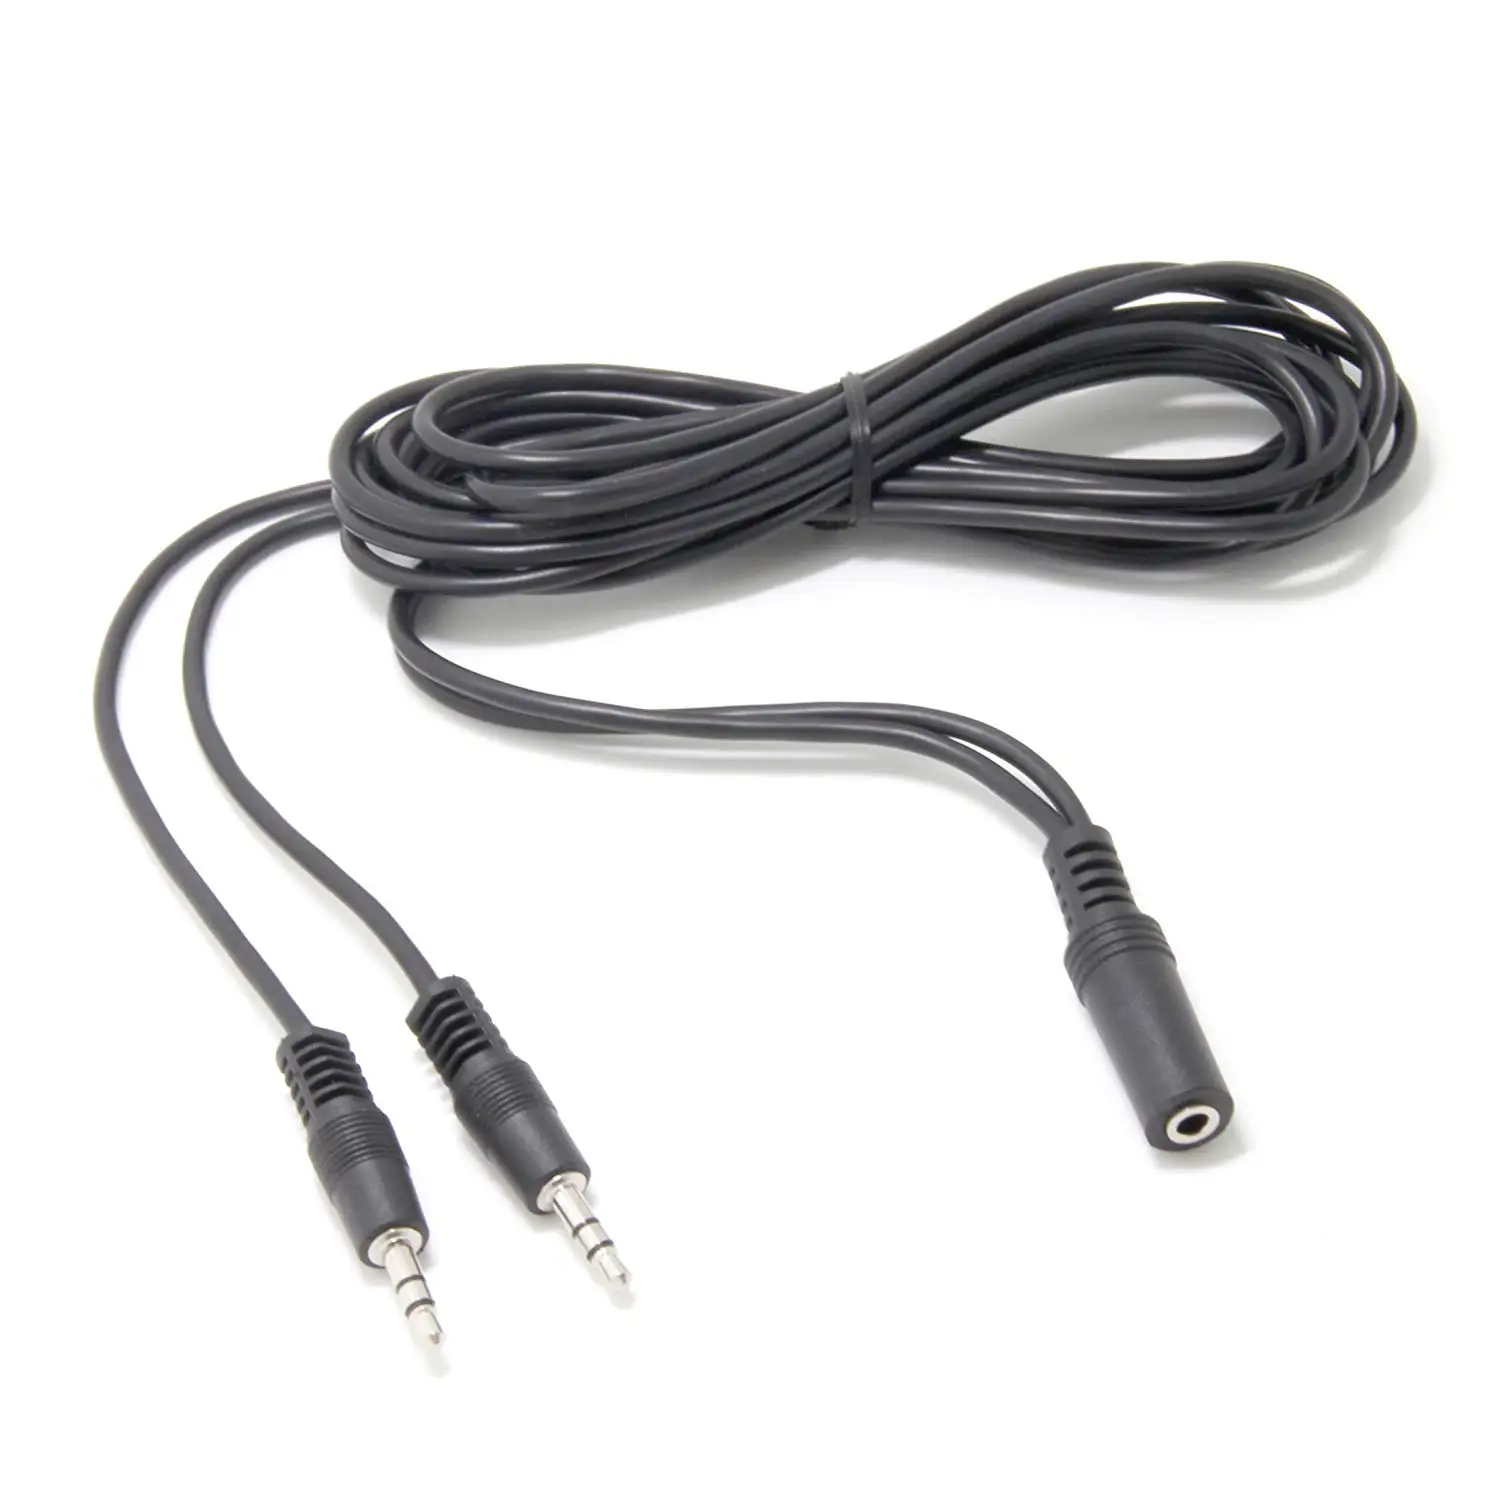 stuk weekend medeklinker Right Angle Aux Cable 1 To 2 Stereo Splitter Cable 3.5mm Stereo Audio Y  Splitter 2 Female To 1 Dual Male Cable Adapter - Buy 3.5mm Splitter  Cable,Y-splitter Audio Cable,3.5mm Splitter Cable